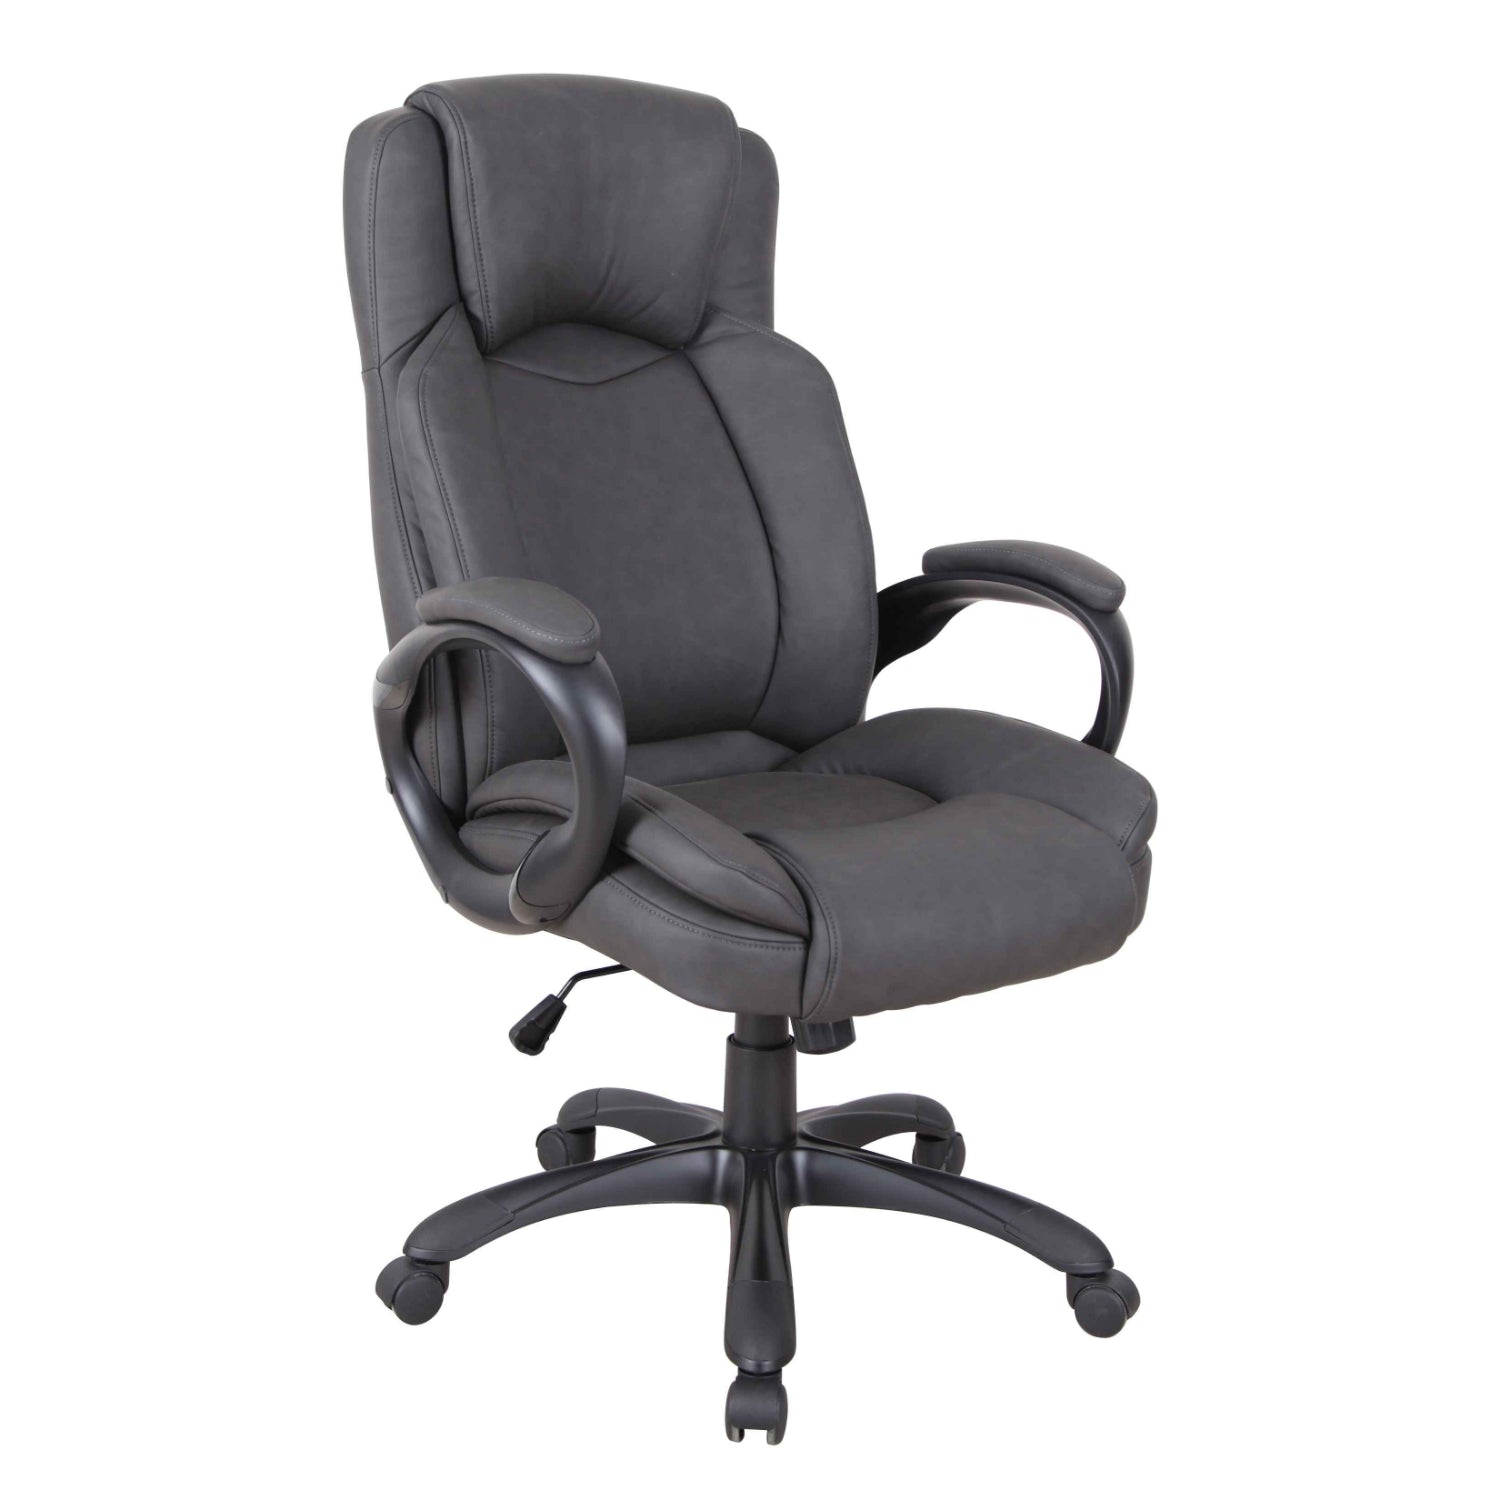 ViscoLogic High-back Ergonomic Thick Padded Swivel PU Leather  Executive Chair, Computer Desk Office Chair